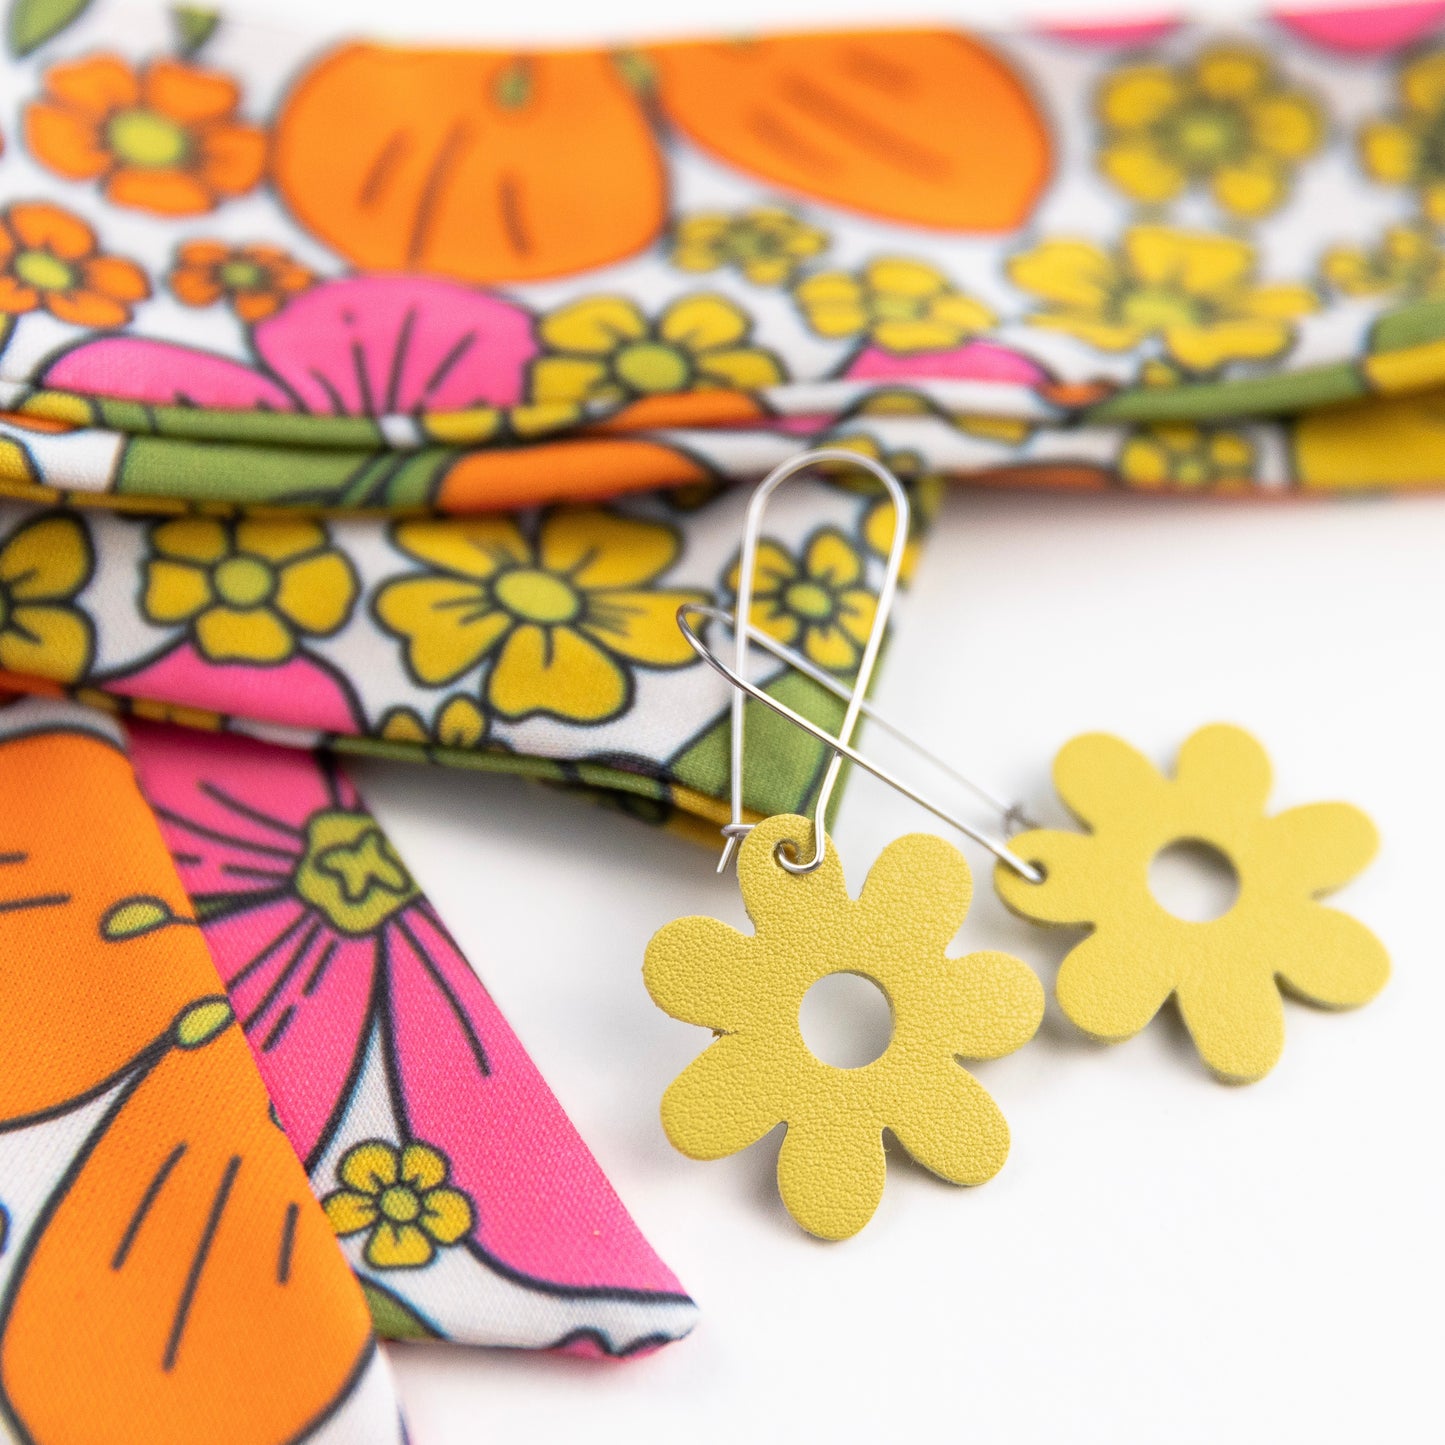 THE BEST EARRINGS/HEADBAND in Nostalgic Floral + Yellow Flower Drops/ Statement Accessories